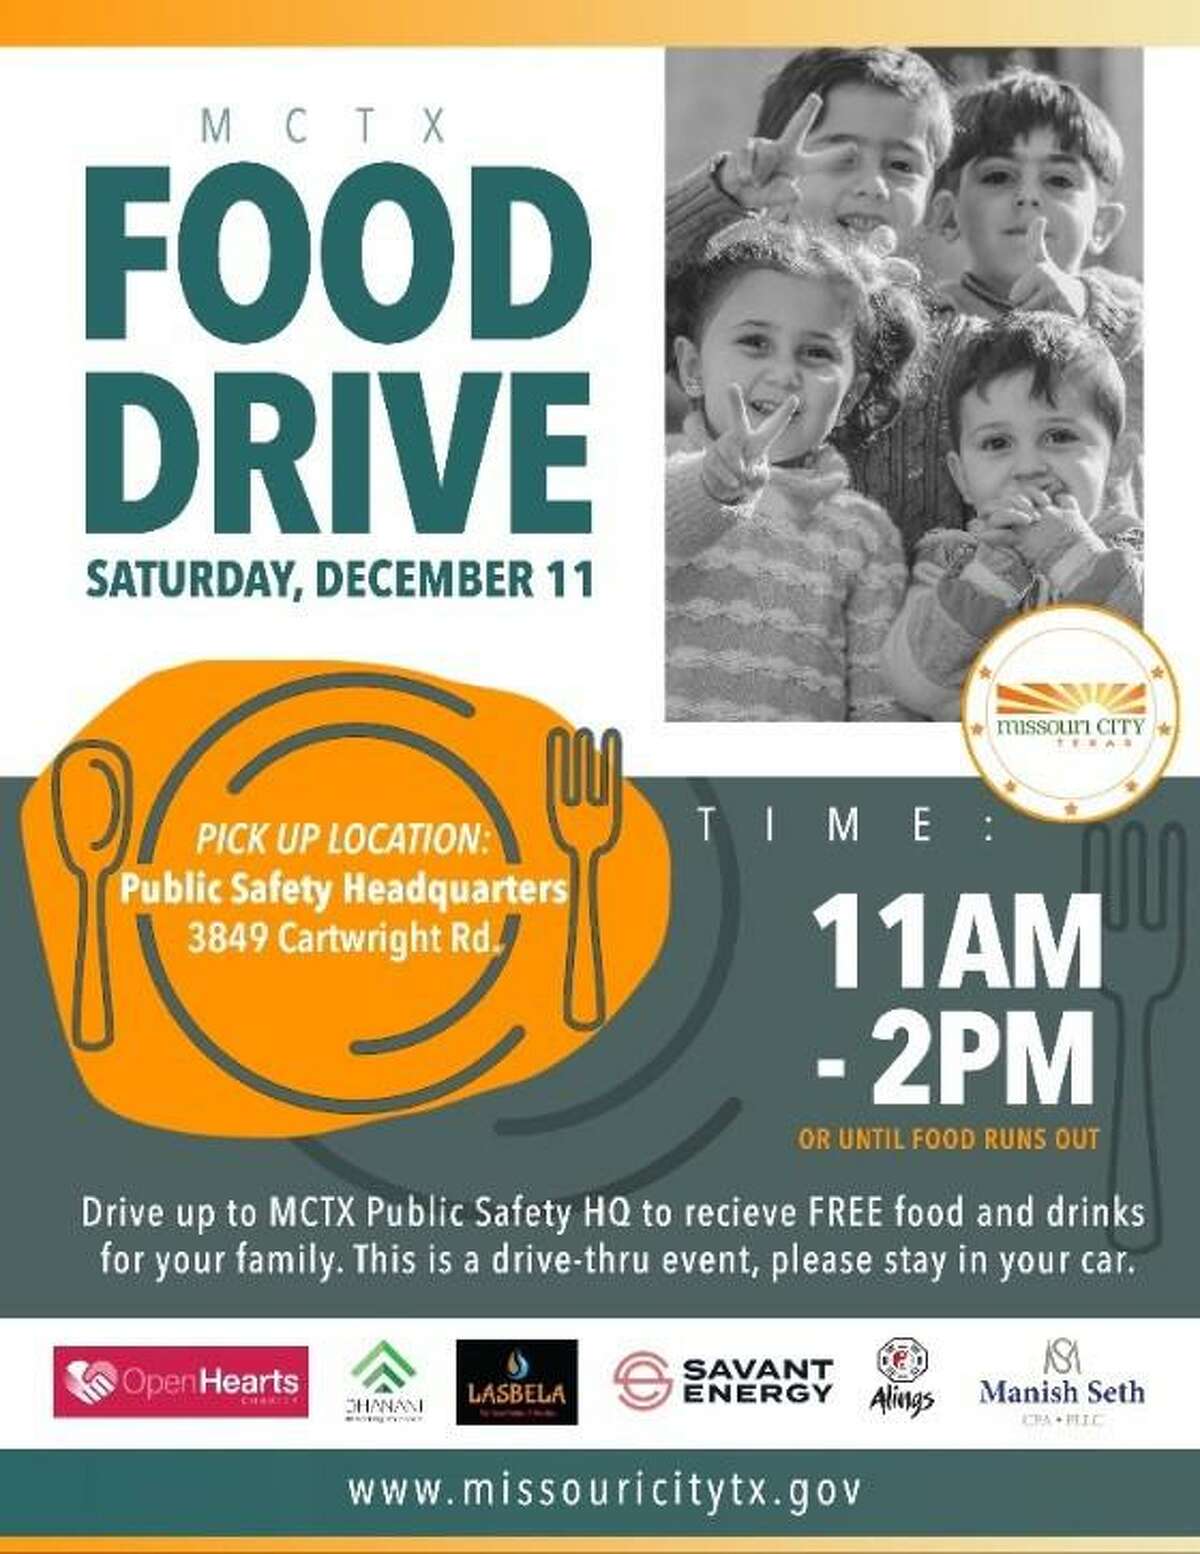 The MCTX Food Drive will distribute free food and drinks to Missouri City residents on Saturday, Dec. 11, at the city’s Public Safety Headquarters.